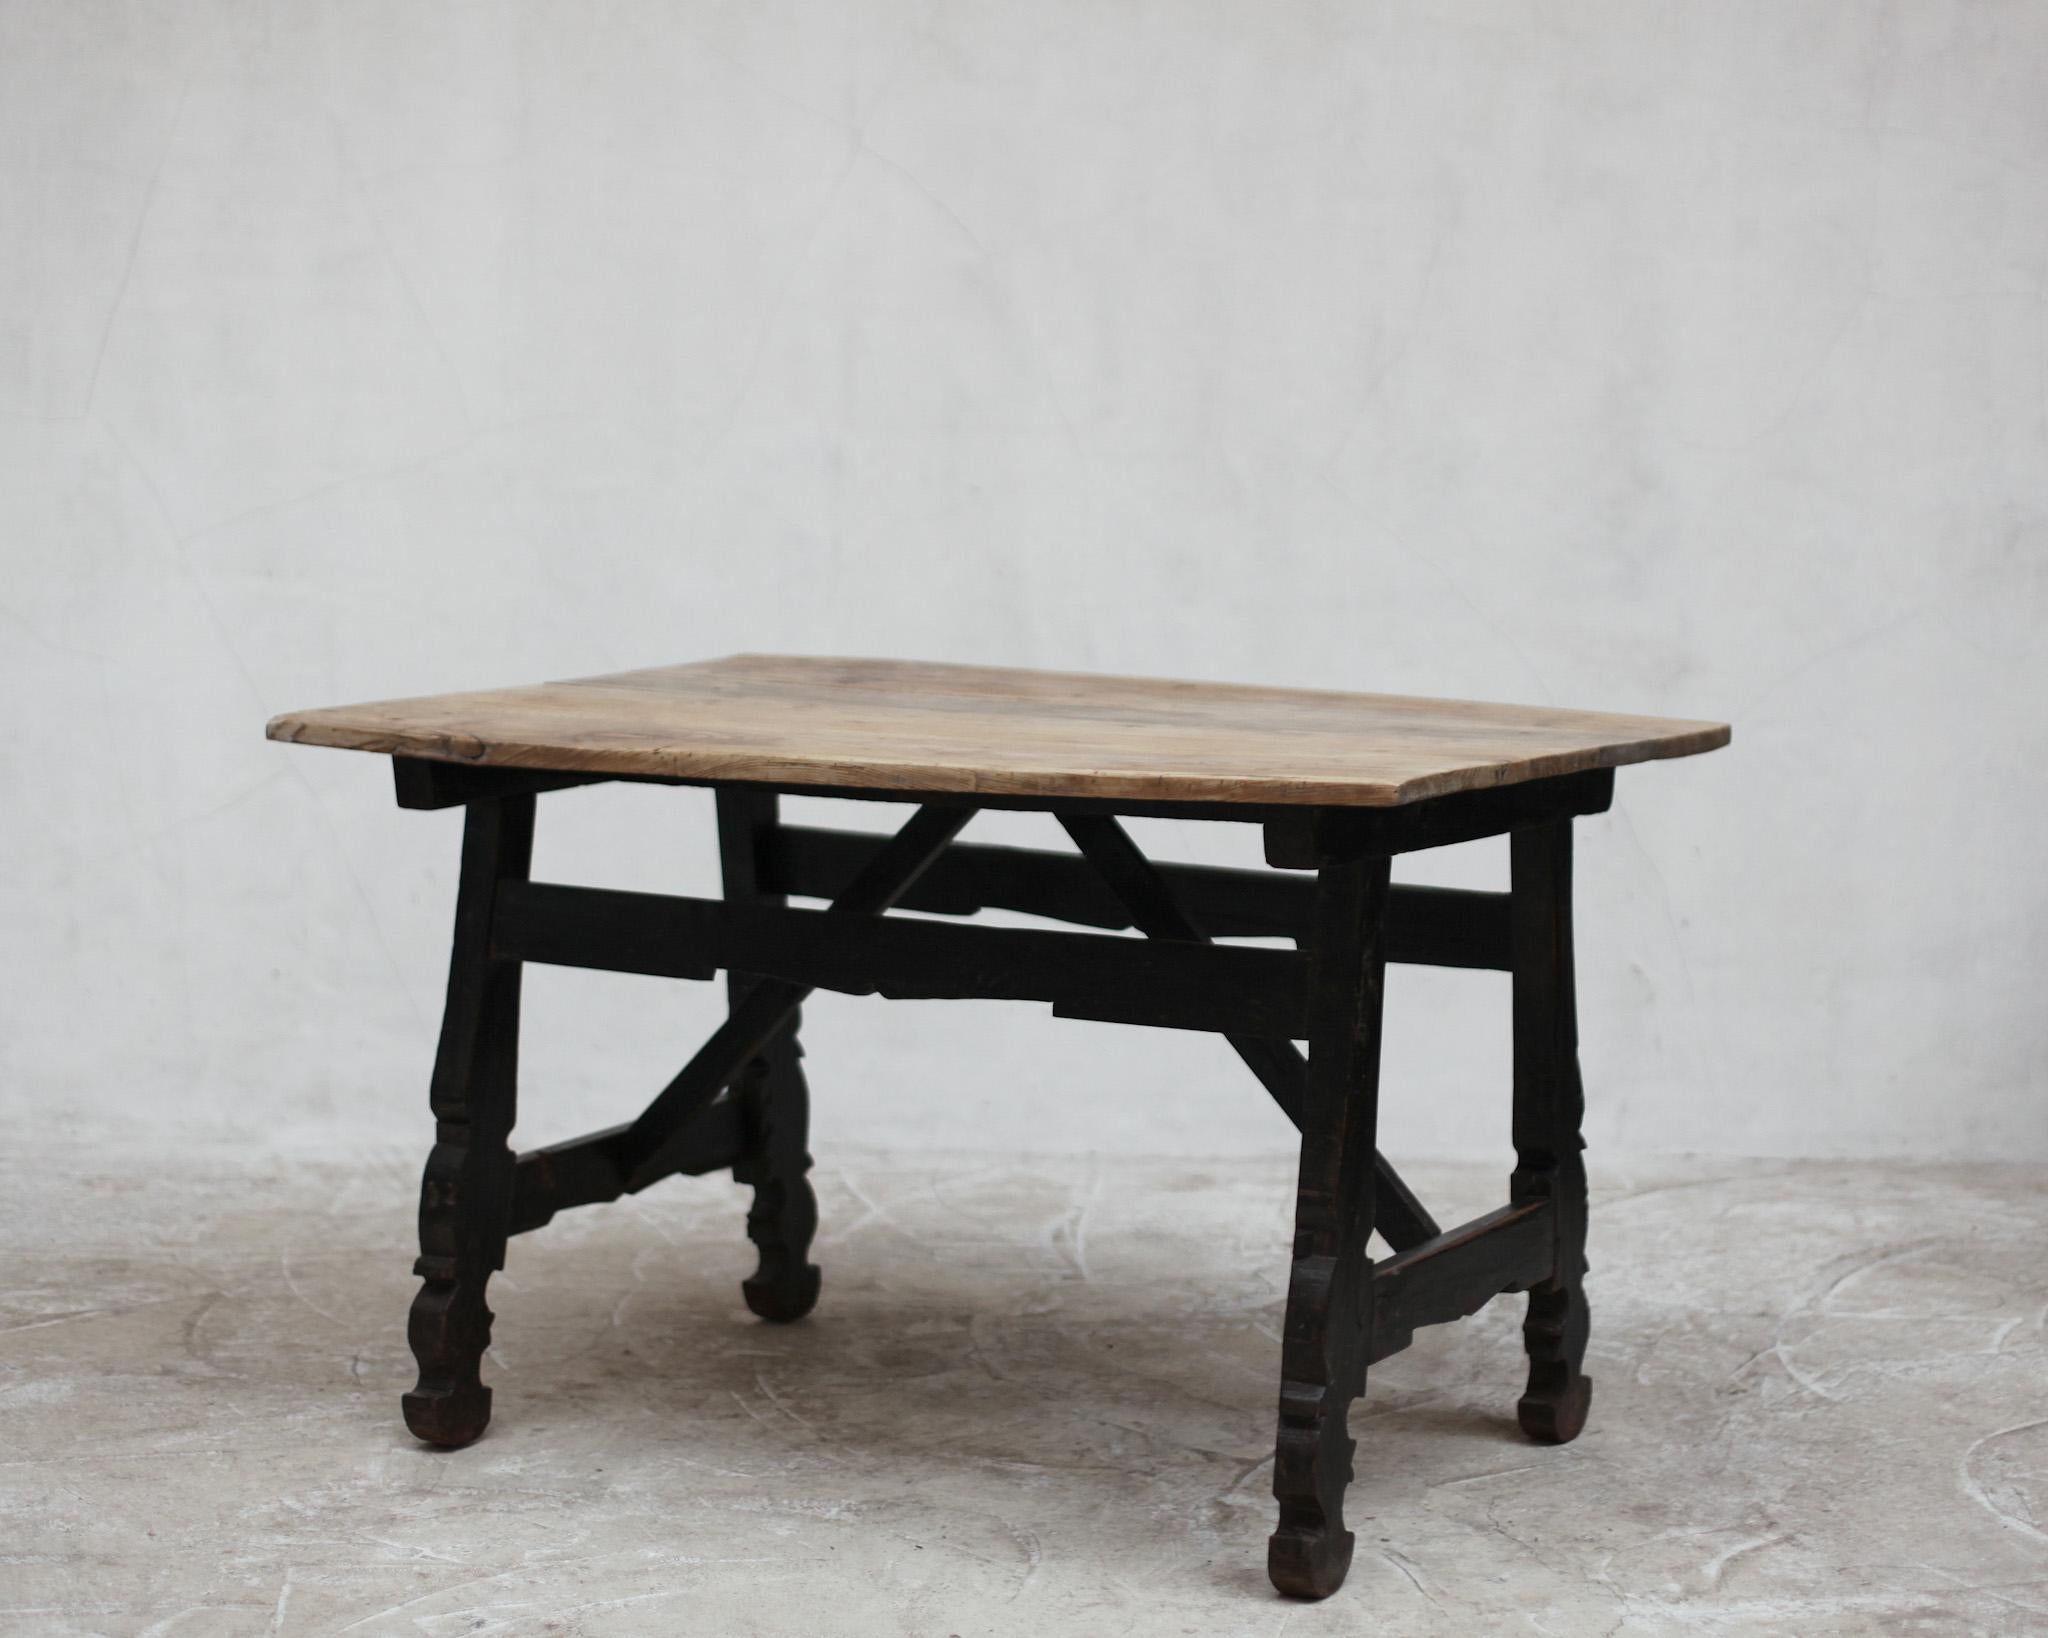 A lovely 18th C. Catalan table with later 19th C. Top.

Classic 